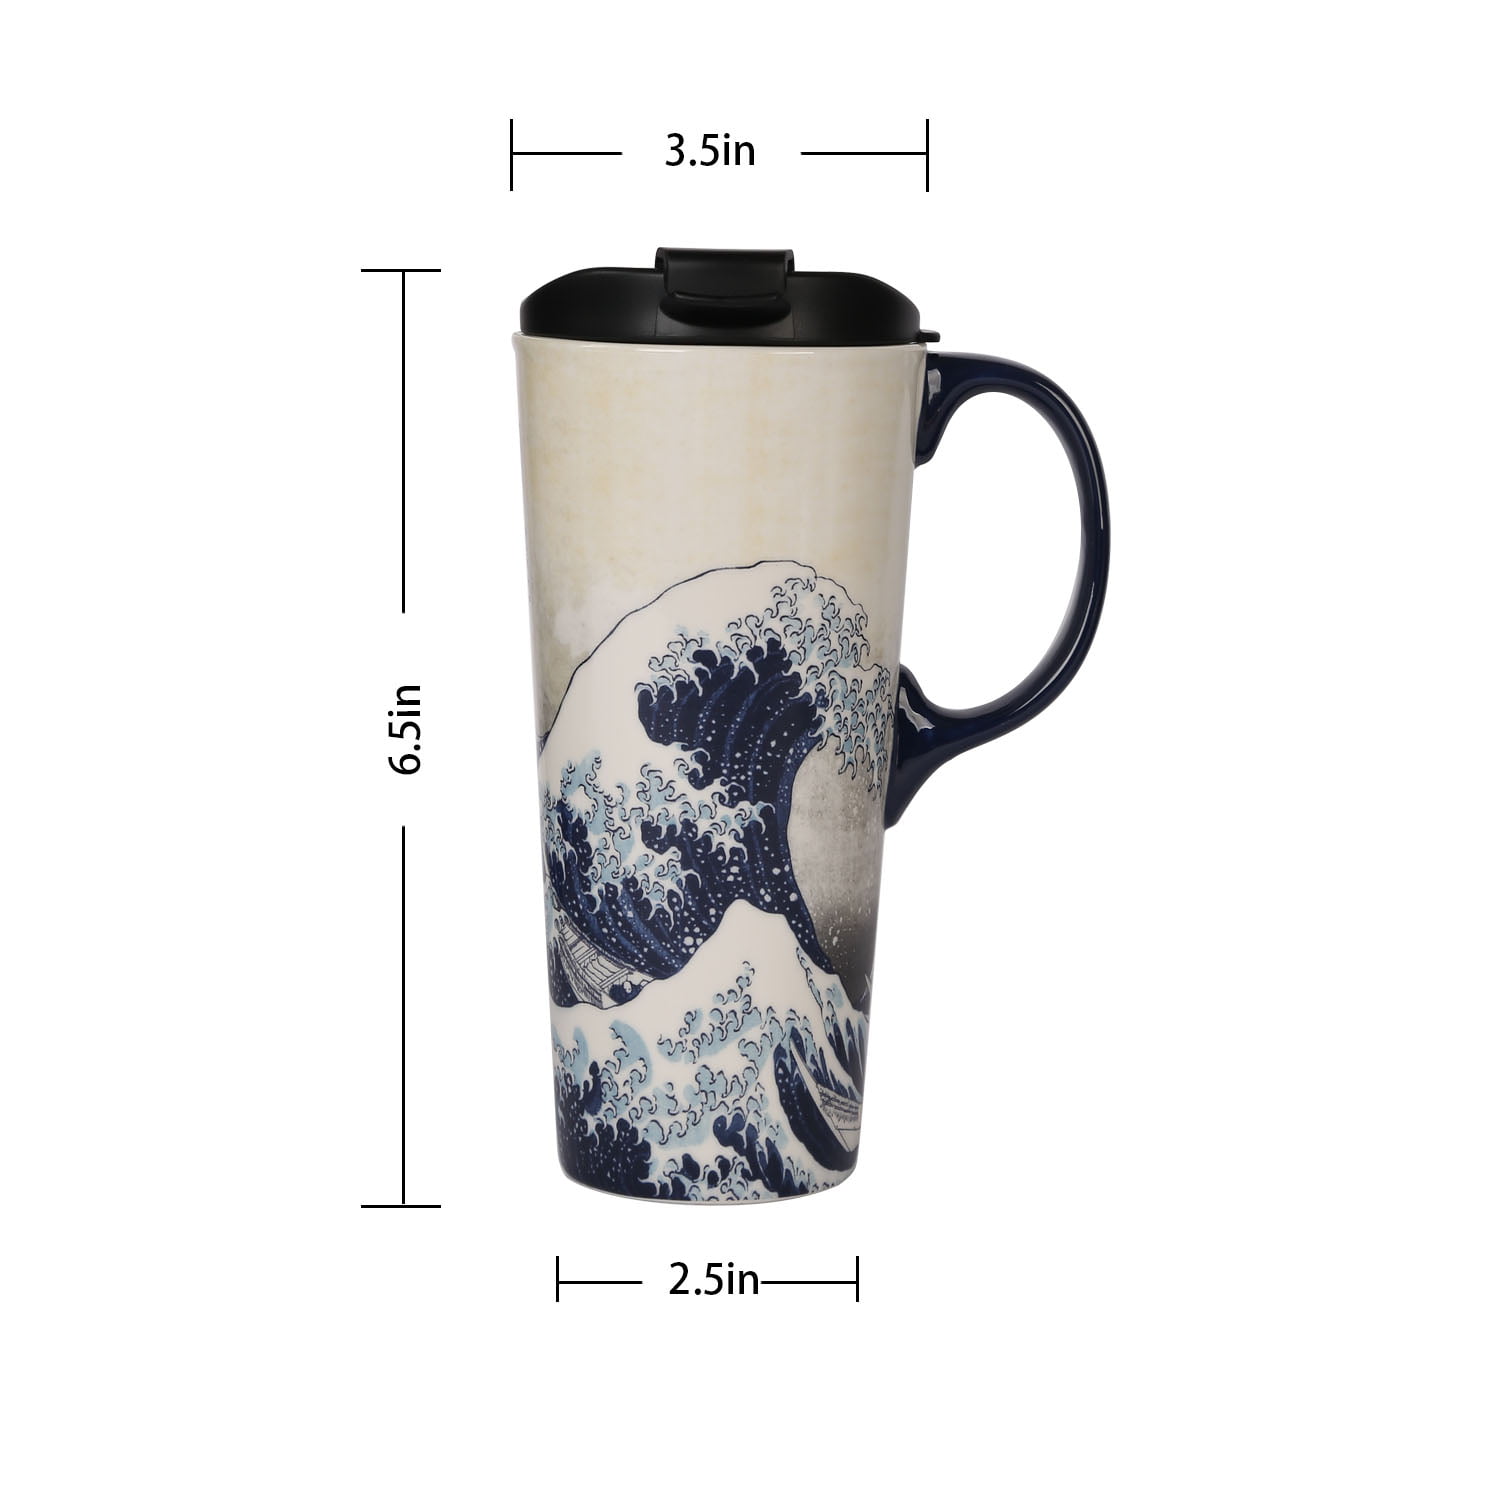 Ceramic Travel Mug Porcelain Coffee Cup with Spill-proof Lid and